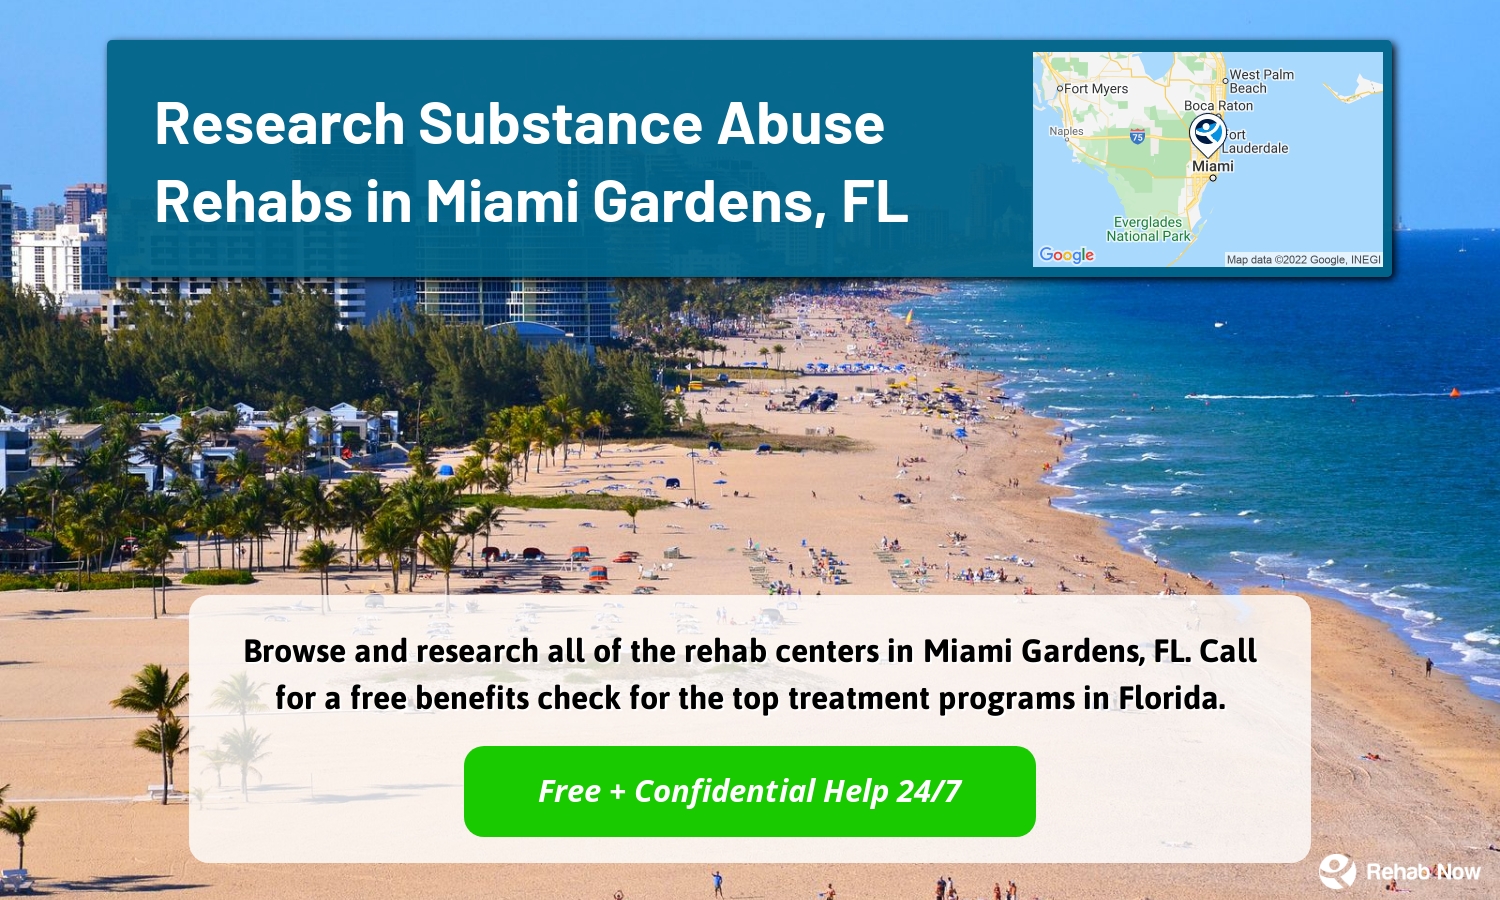 Browse and research all of the rehab centers in Miami Gardens, FL. Call for a free benefits check for the top treatment programs in Florida.